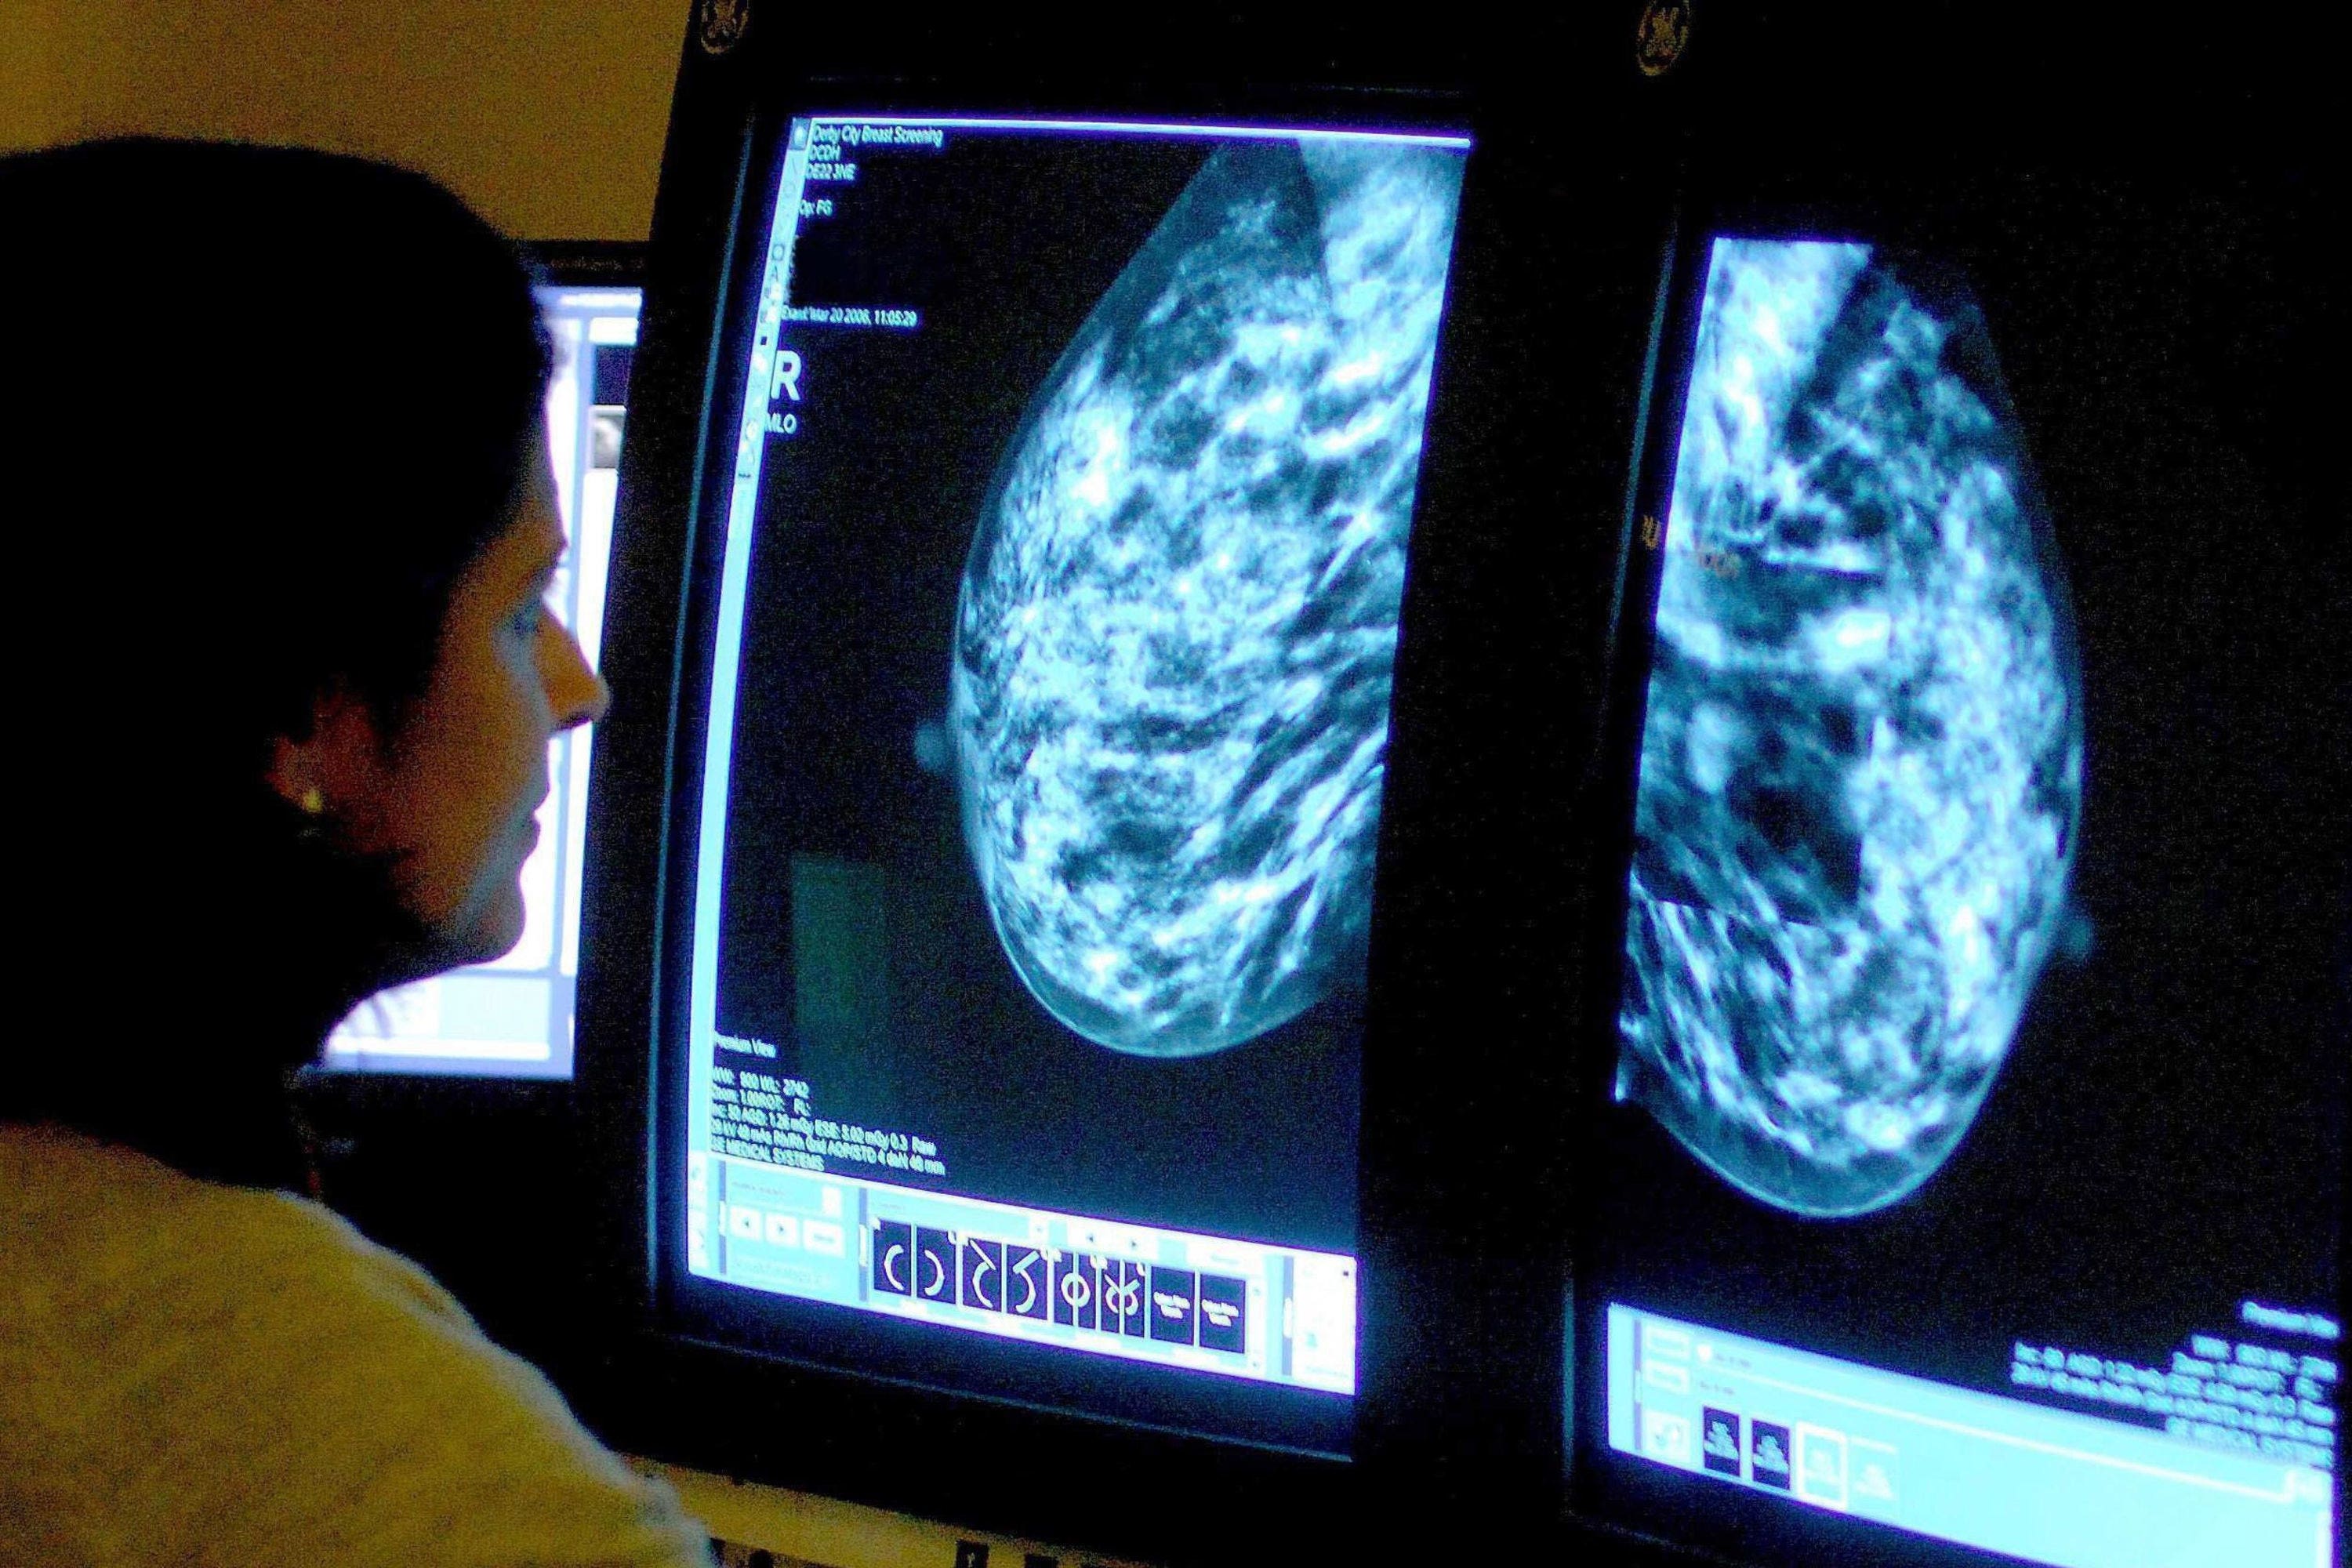 Cancer cases are predicted to soar in the coming years, according to new analysis (Rui Vieira/PA)